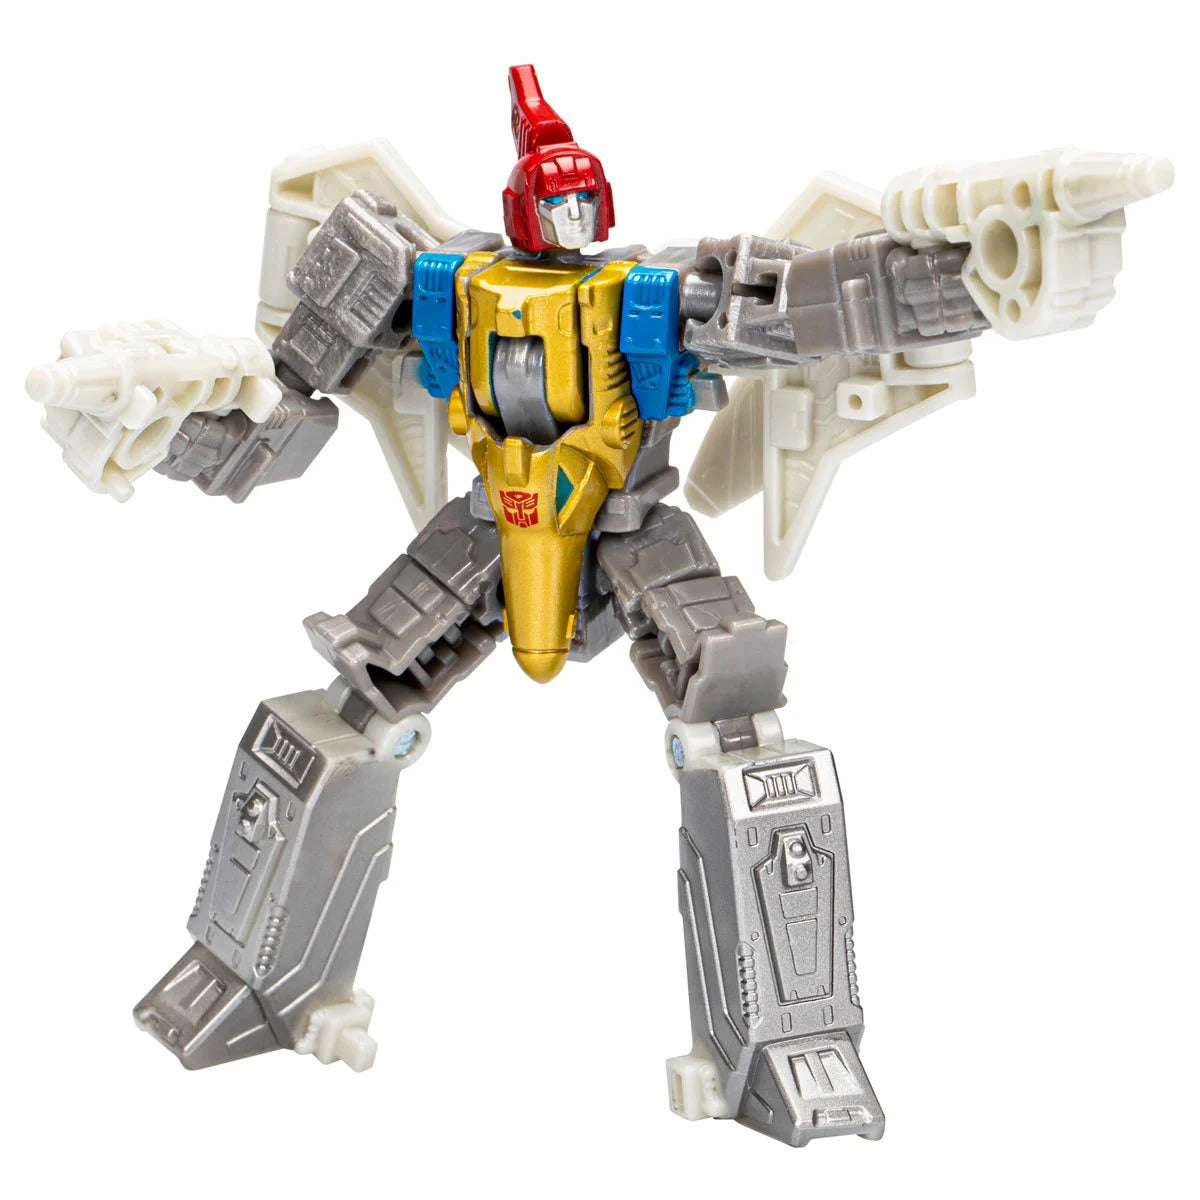 Transformers Generations Legacy Evolution Core Dinobot Swoop Action Figure Toy - Heretoserveyou